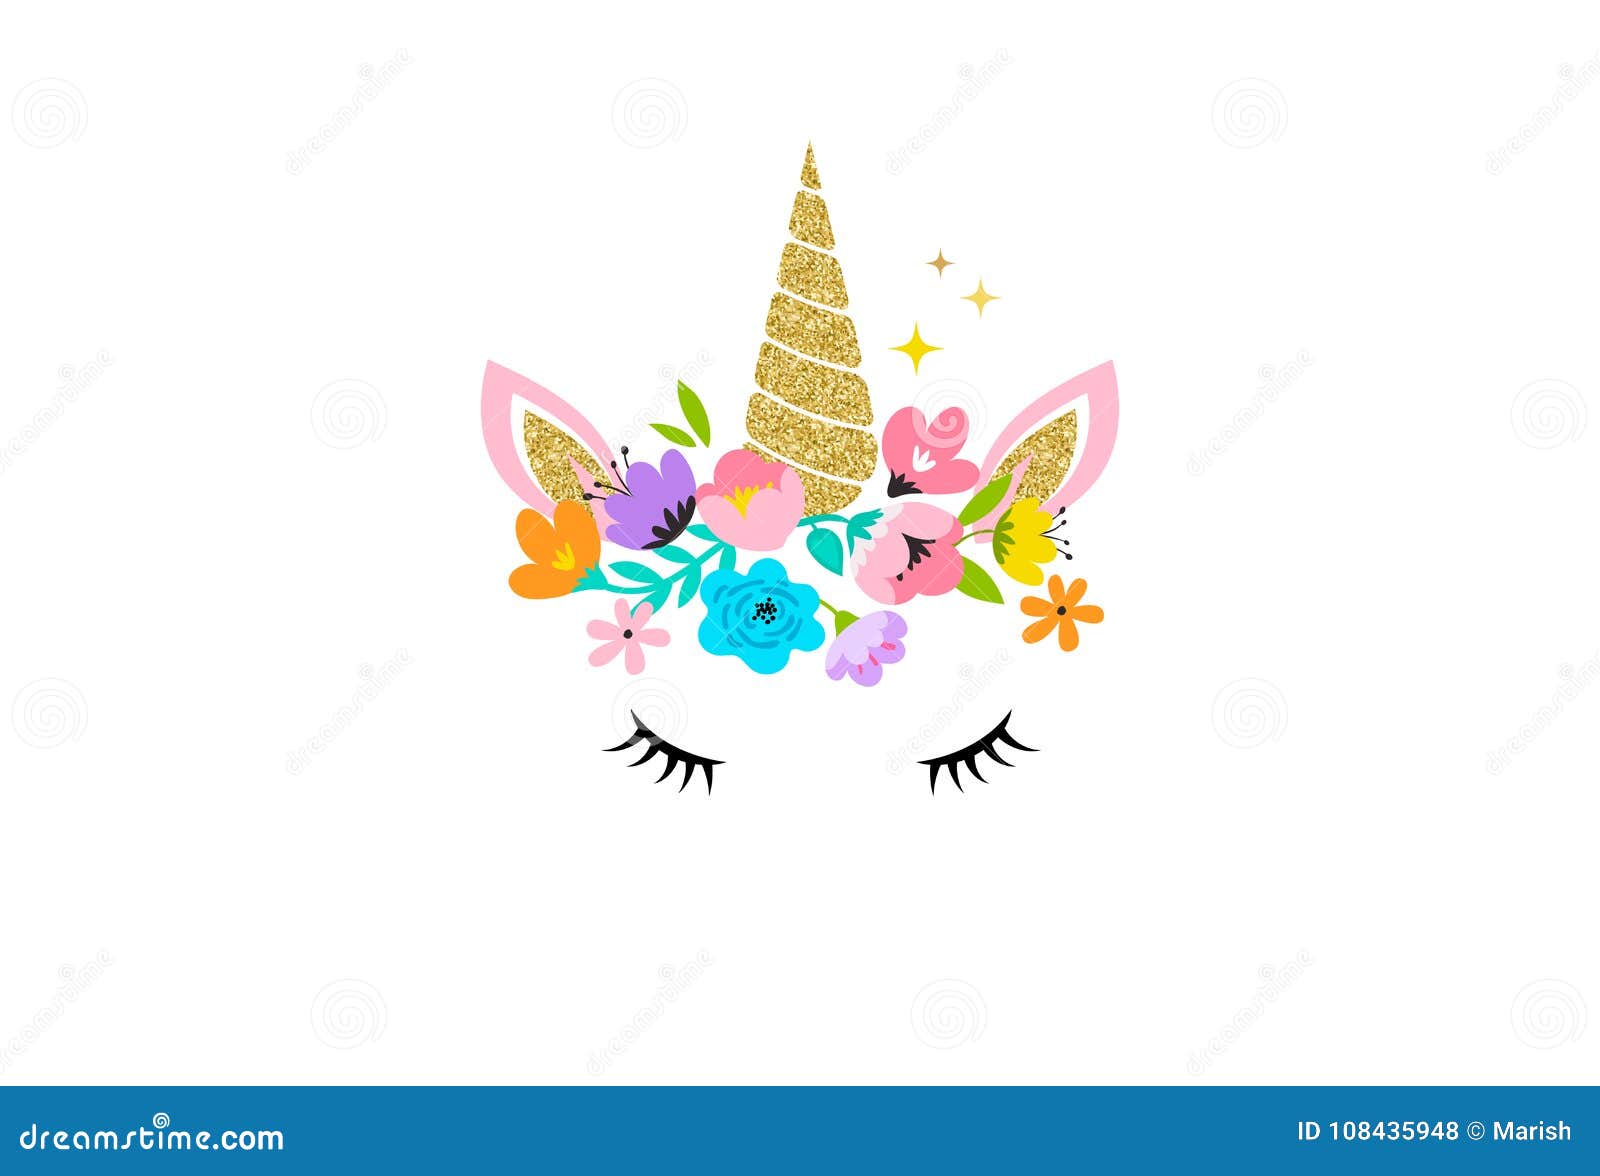 unicorn head with flowers - card and shirt 